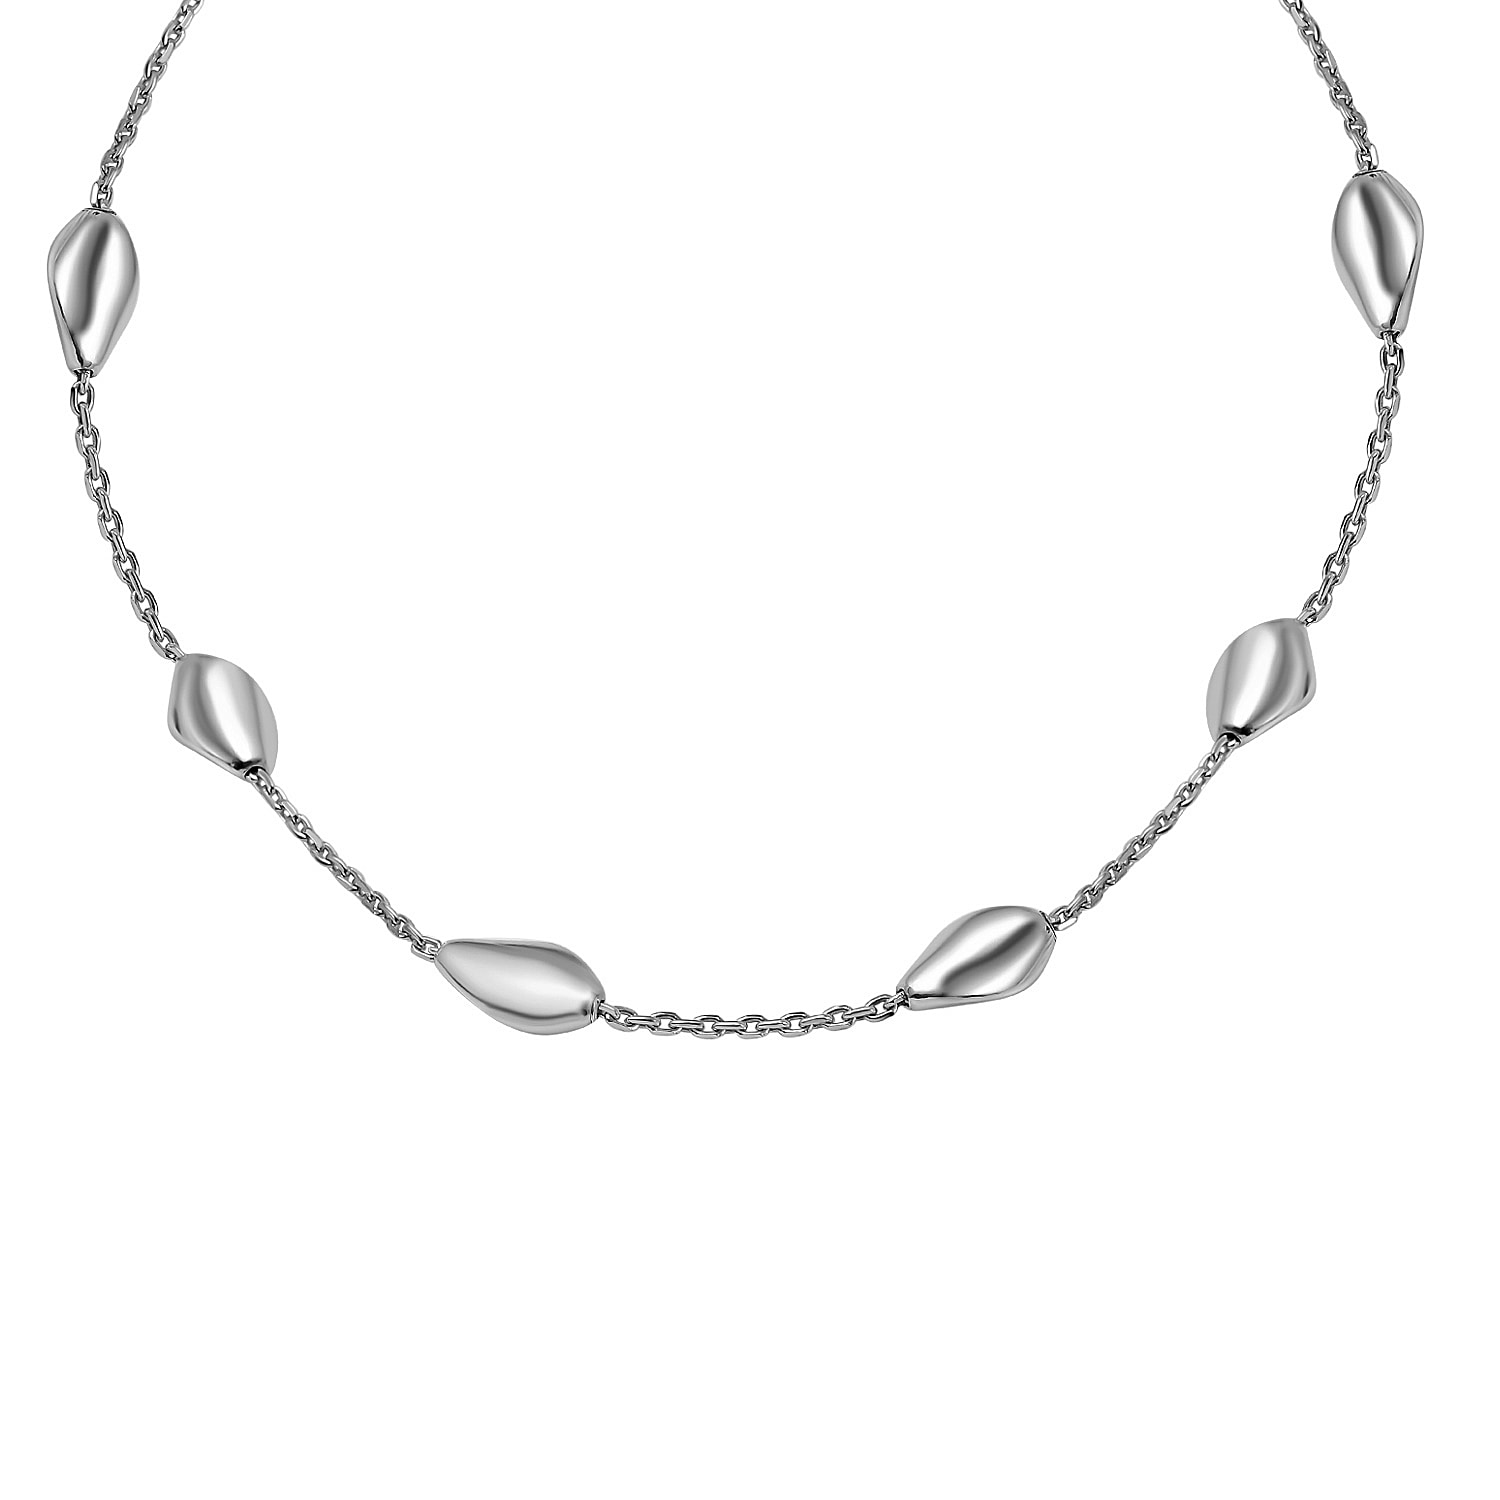 One Time Deal- Rhodium Overlay Sterling Silver Station Necklace (Size - 20)